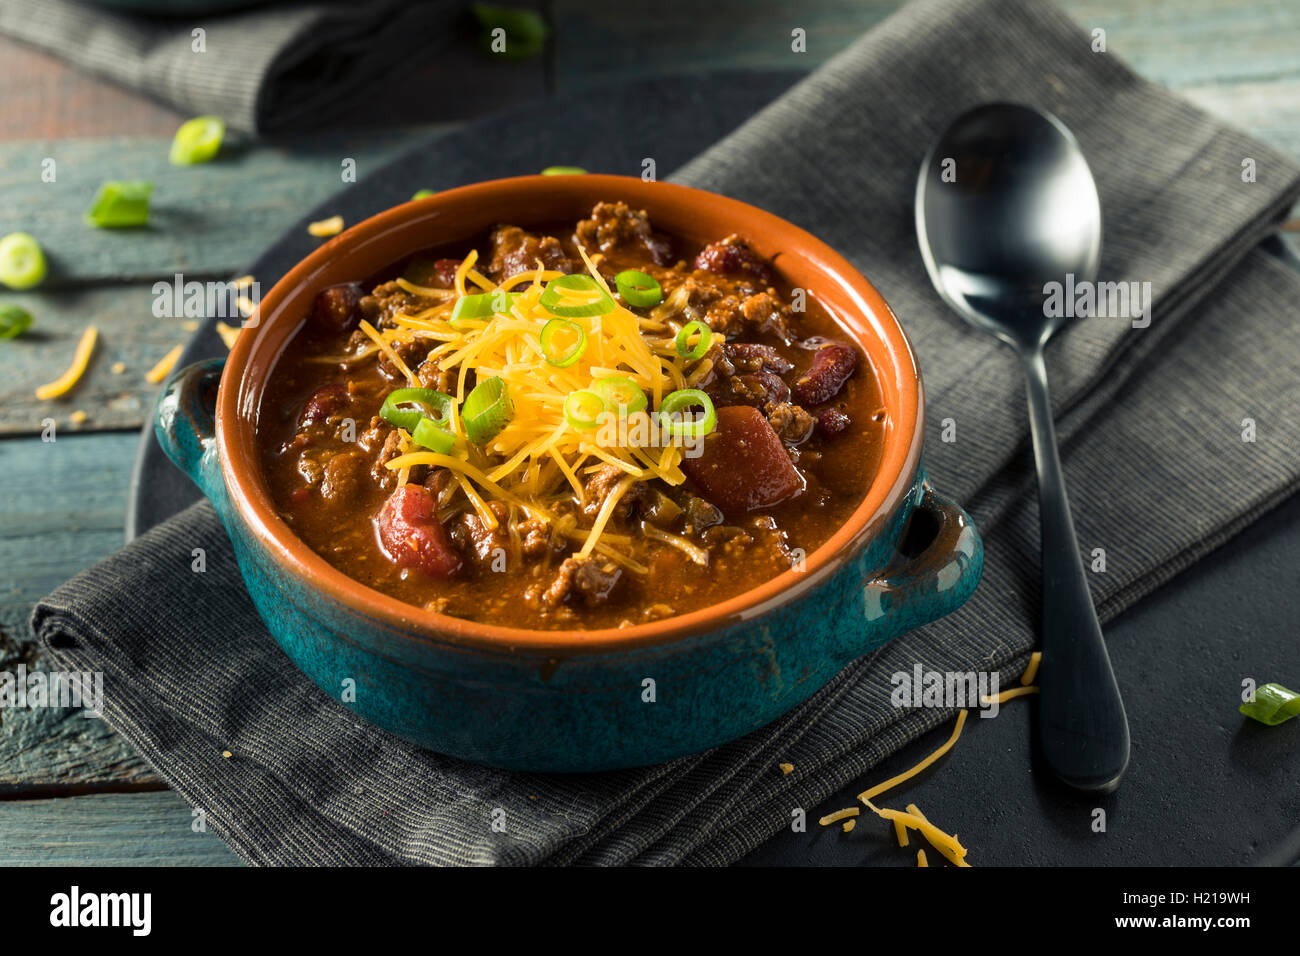 Homemade Beef Chili Con Carne with Cheese and Onions Stock Photo